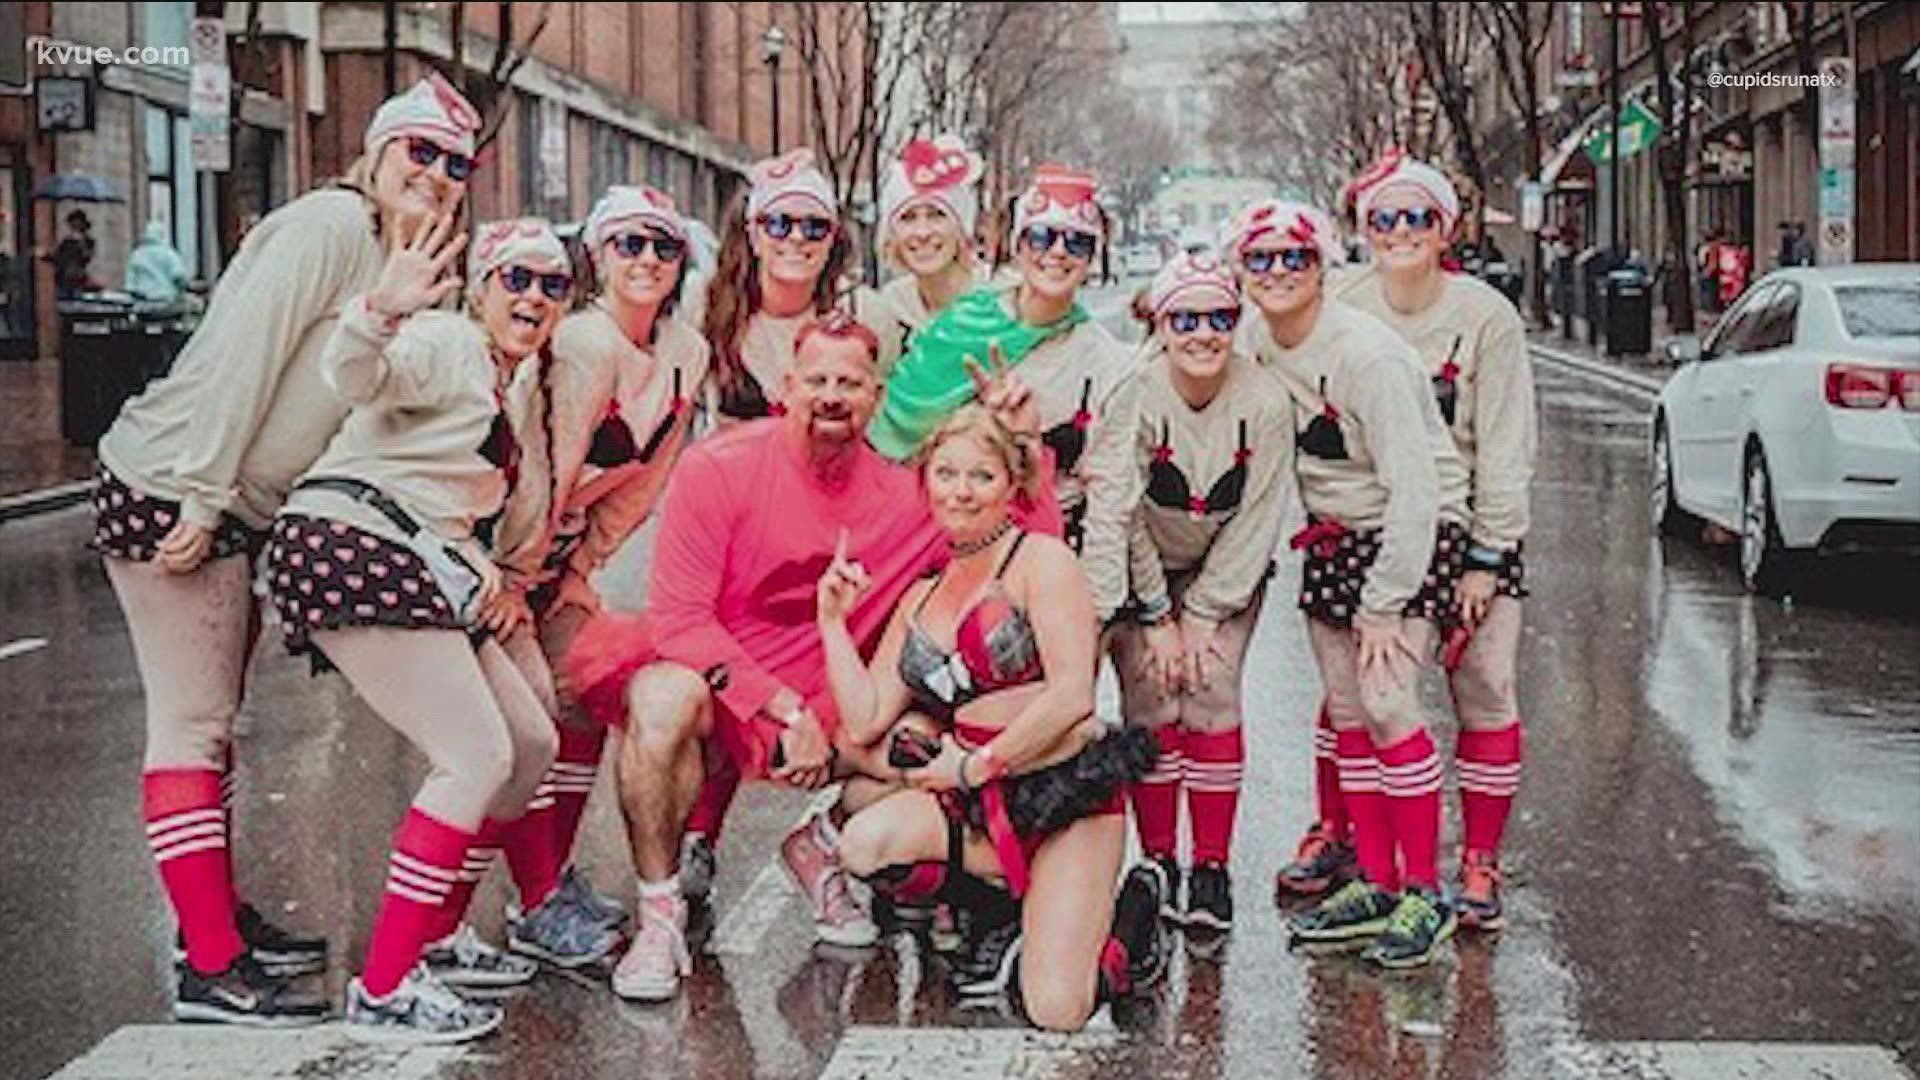 The pantless party run raises funds and awareness for neurofibromatosis, a genetic disorder that causes tumors to grow on nerve's through the body.